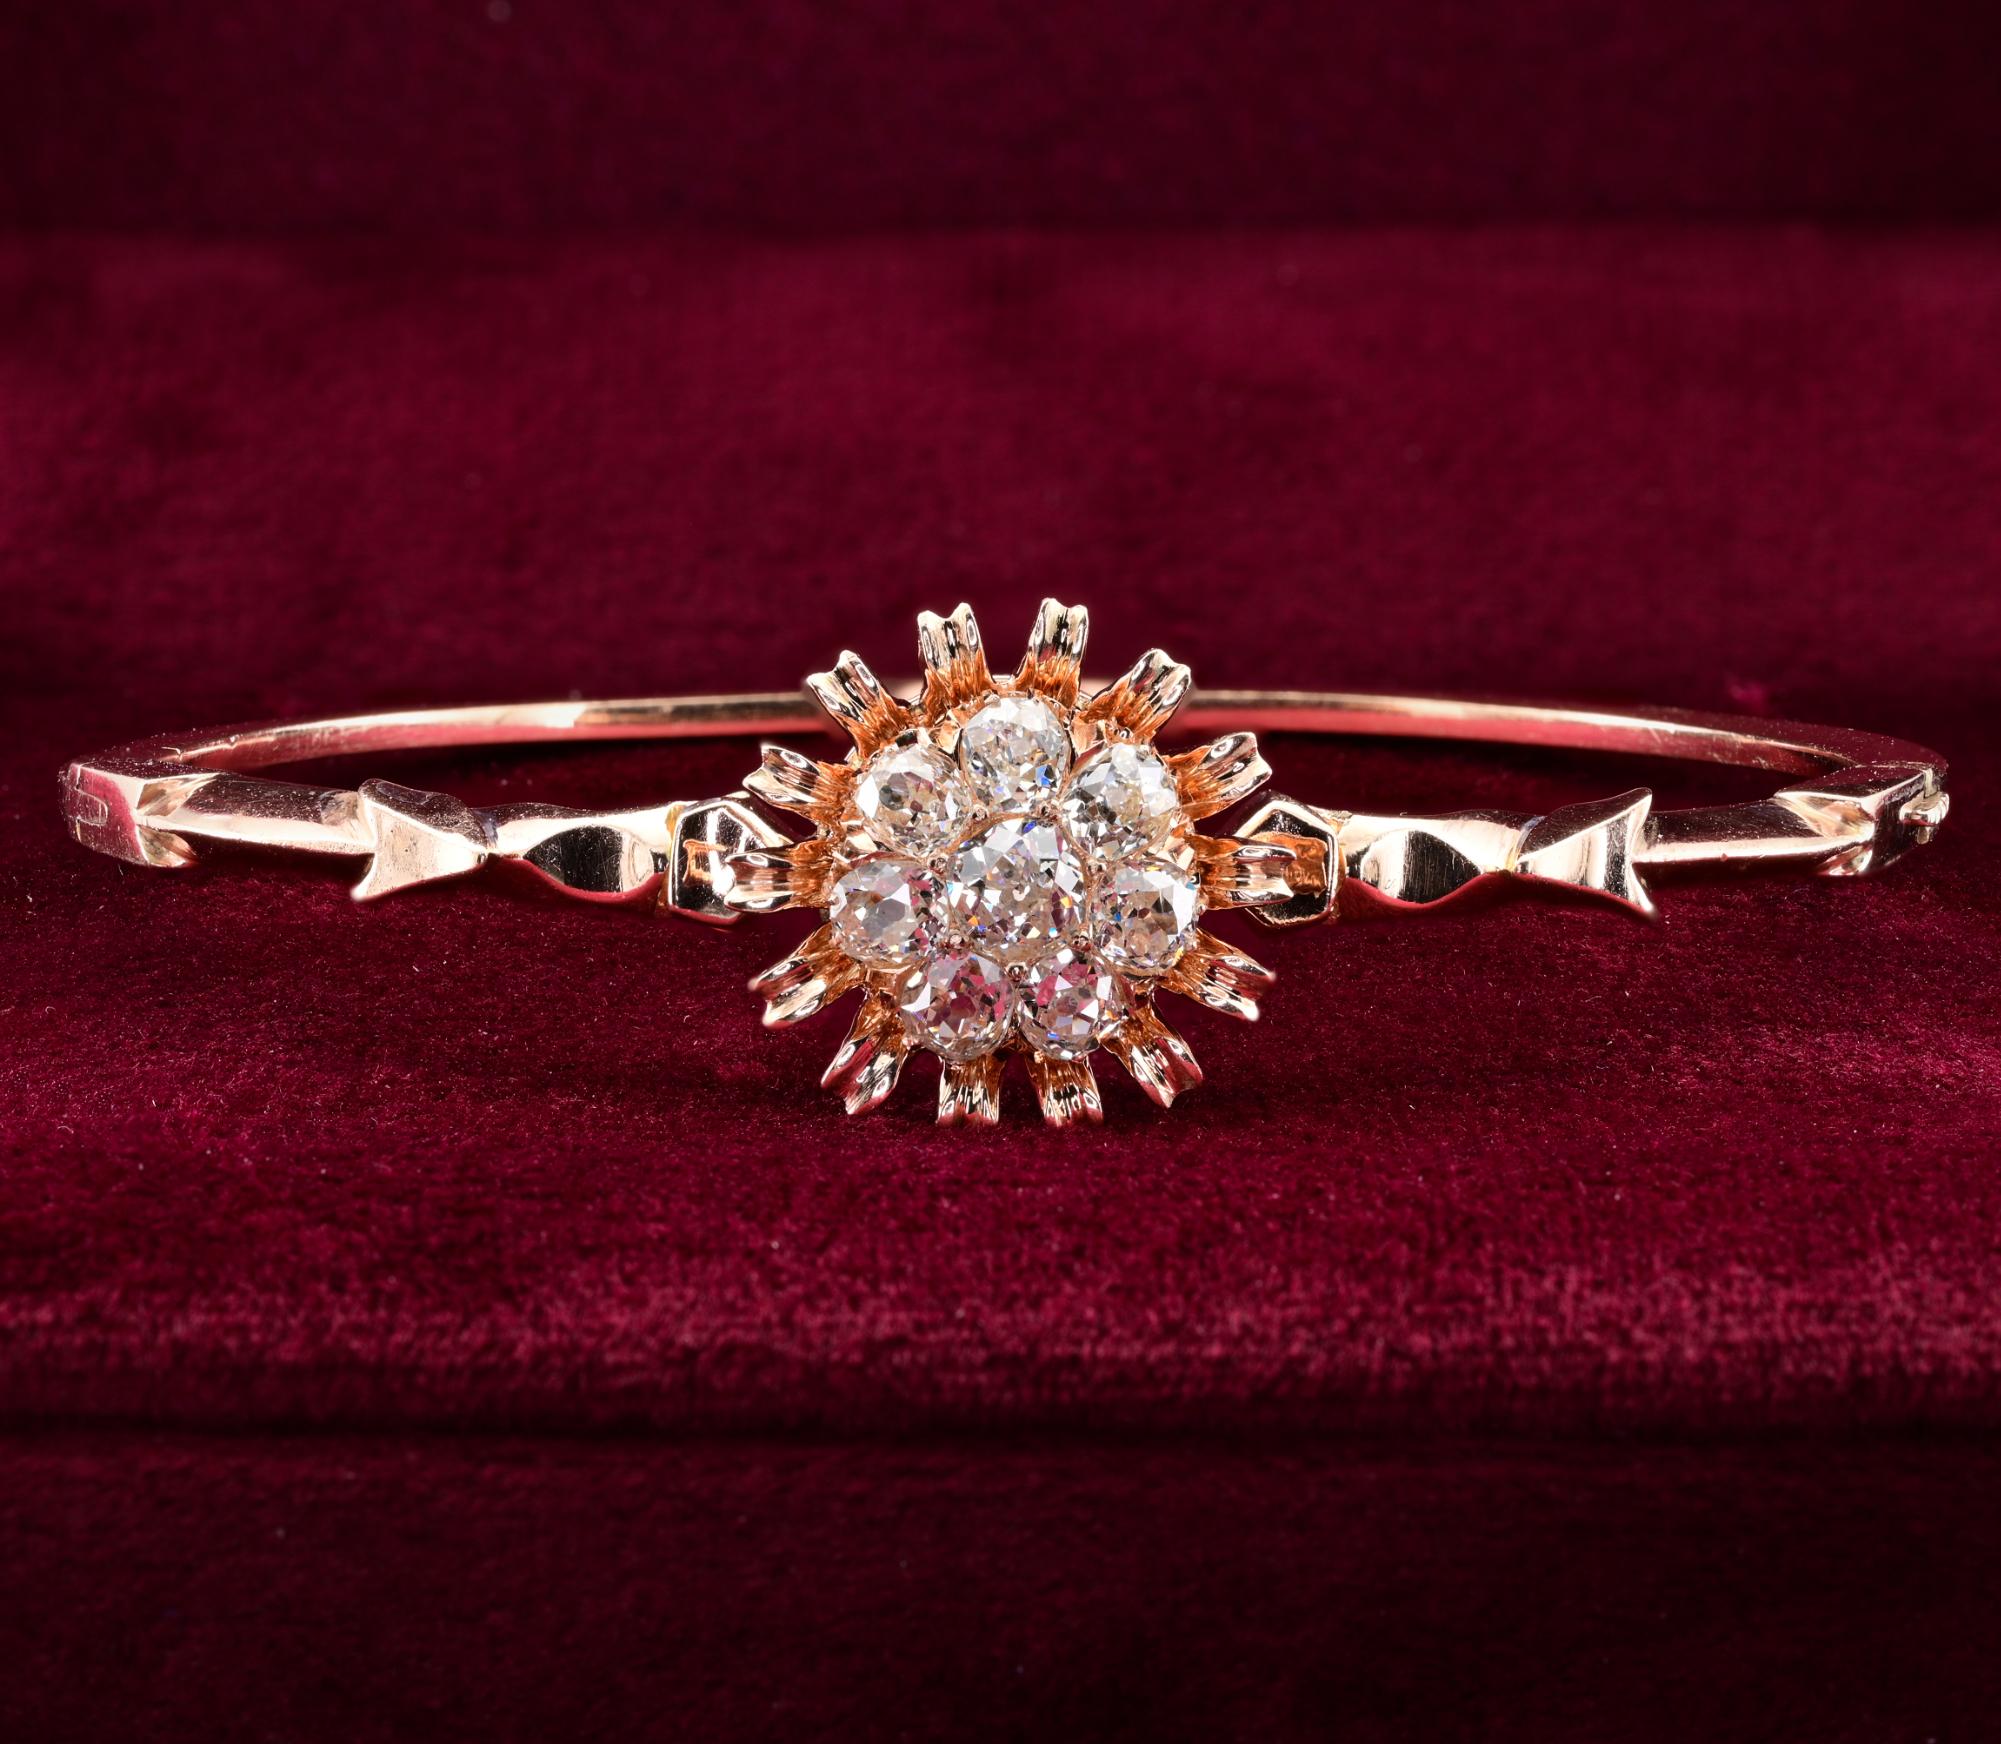 This enchanting Victorian period bangle is 1890 ca
15 KT solid gold hand crafted
Exquisite simple effective design with arrows on shoulders embracing the rich Diamond cluster encircled by lovely gold little petals
Diamonds are of the highest